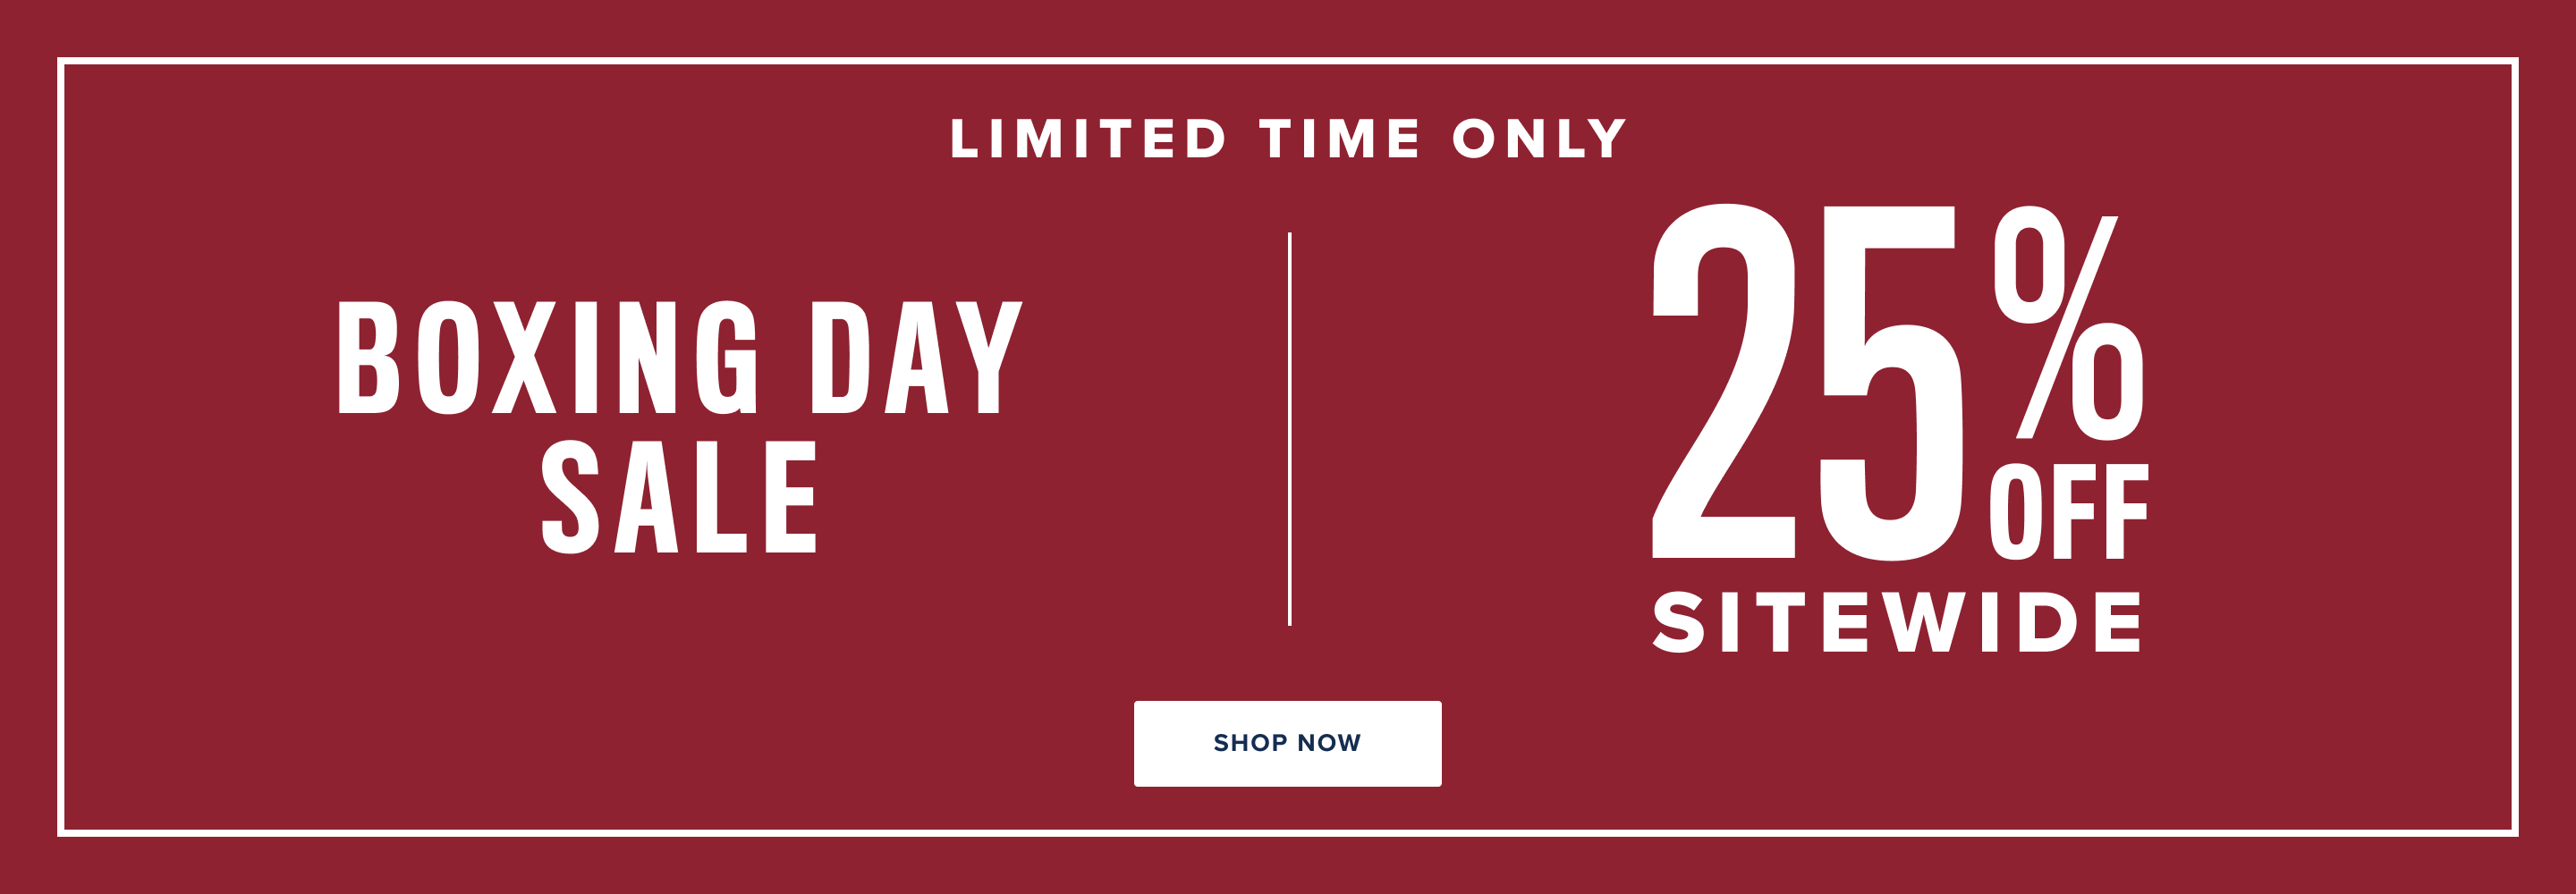 Limited time only. Boxing day sale 25% off sitewide.